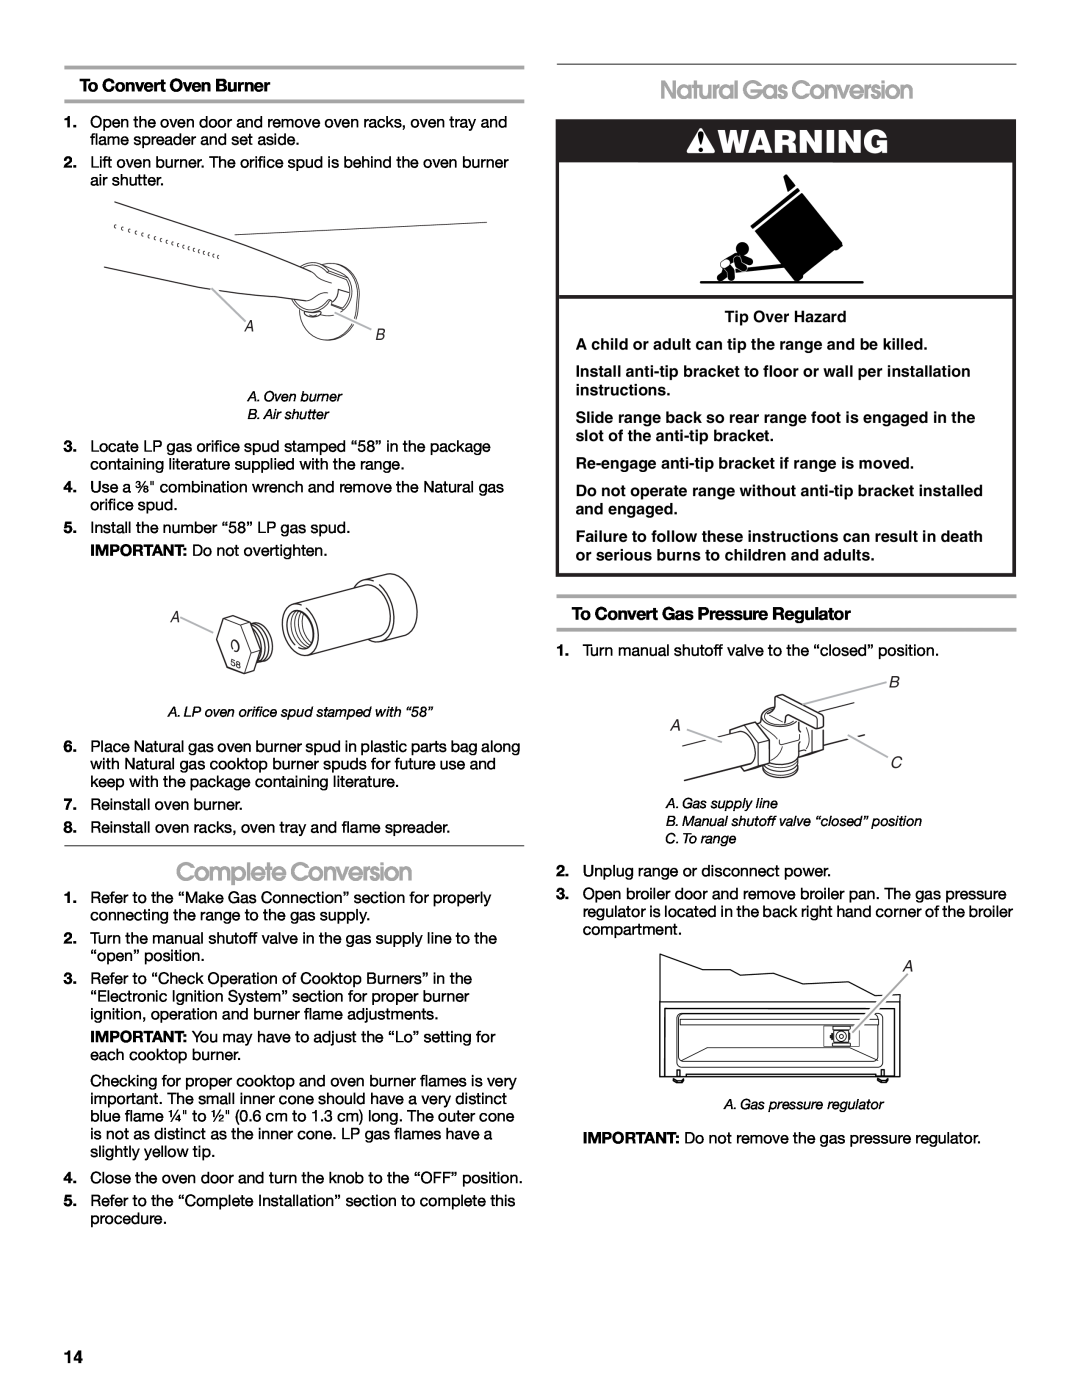 Whirlpool W10459123B installation instructions Complete Conversion, Natural Gas Conversion, To Convert Oven Burner, B A C 